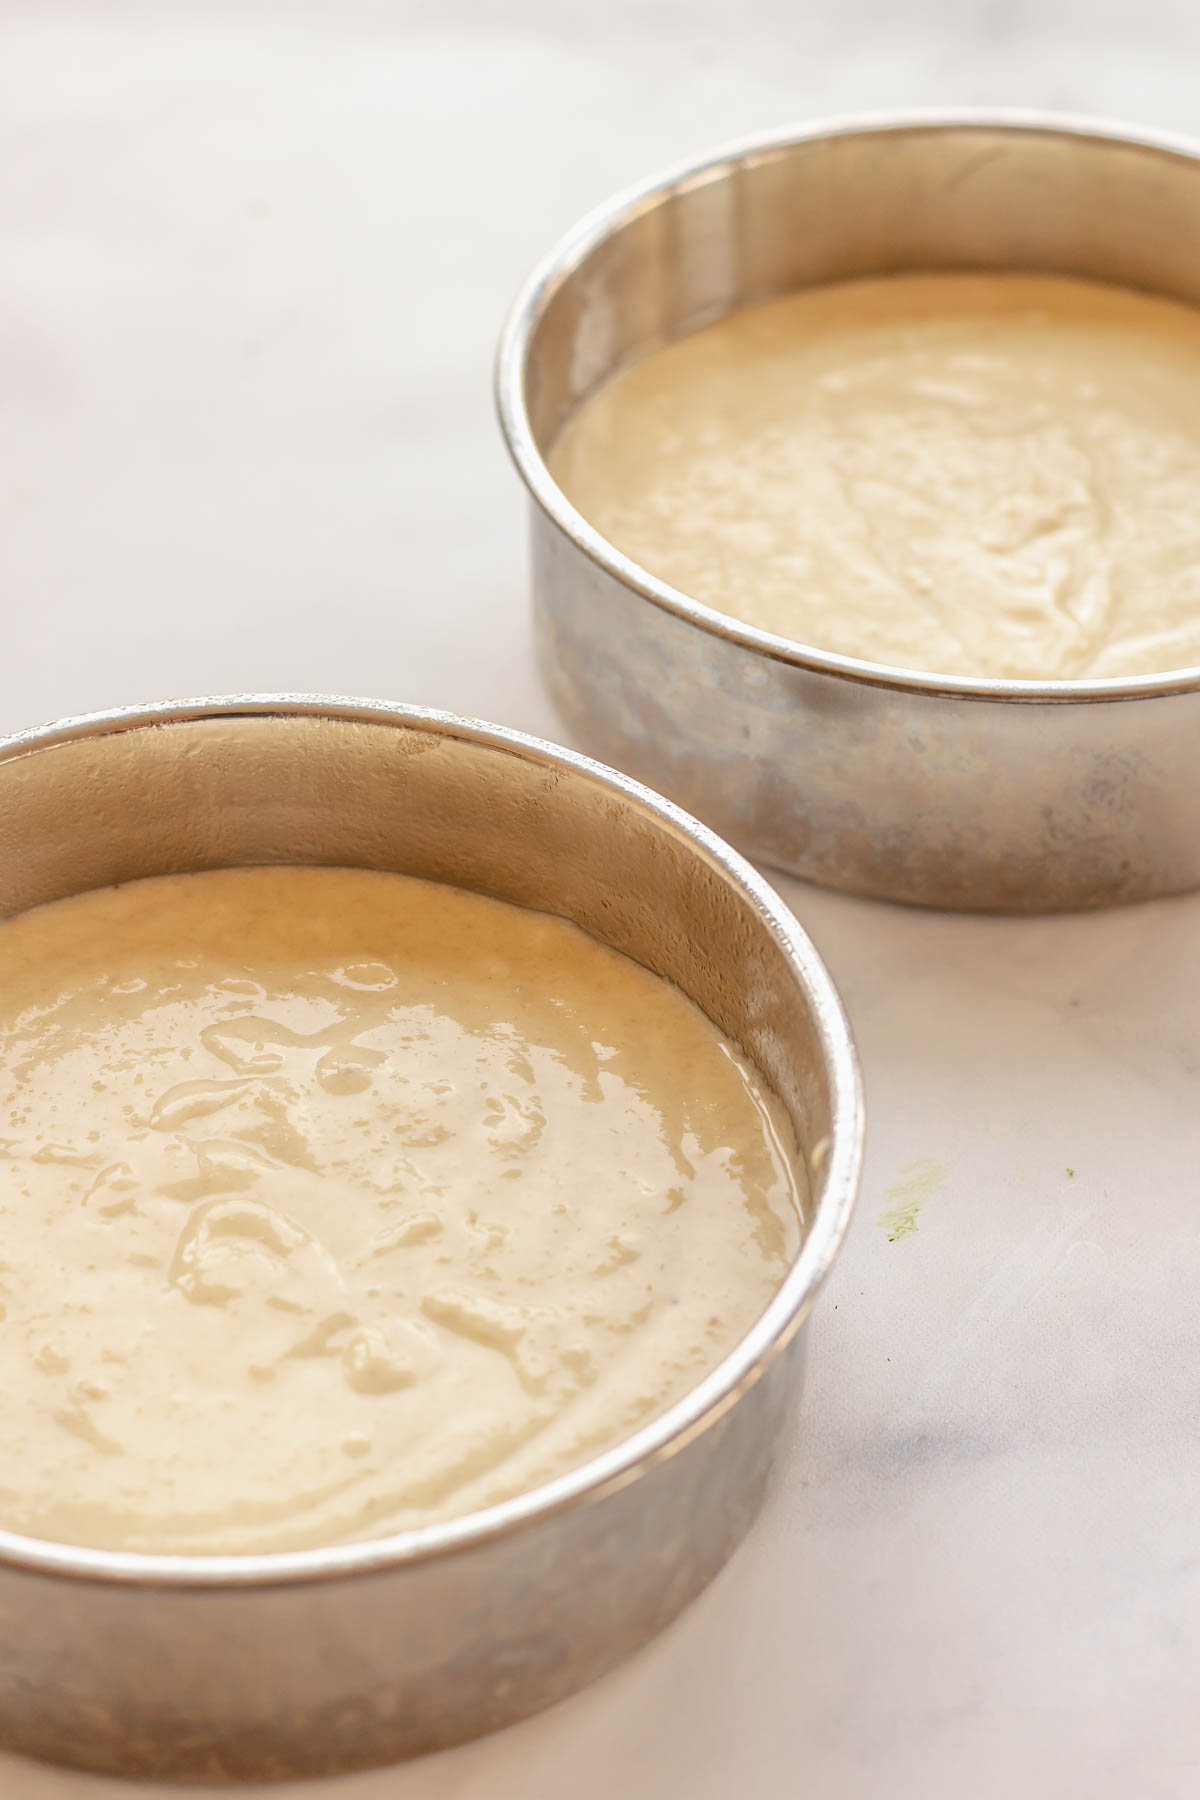 Almond cake batter in two cake pans.